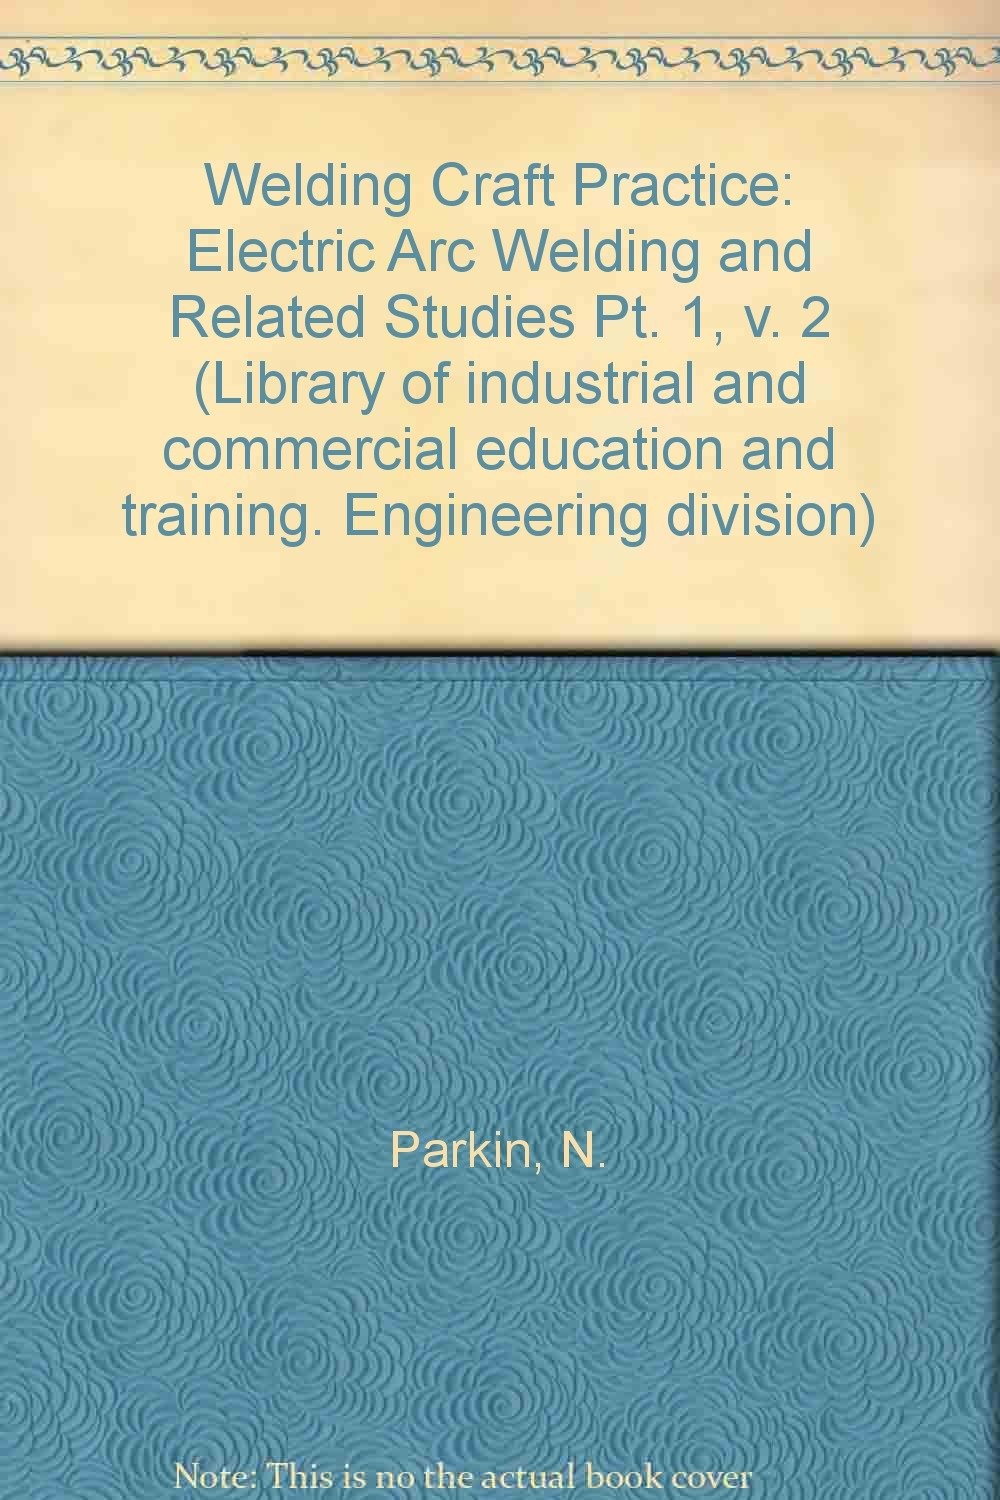 Electric Arc Welding and Related Studies